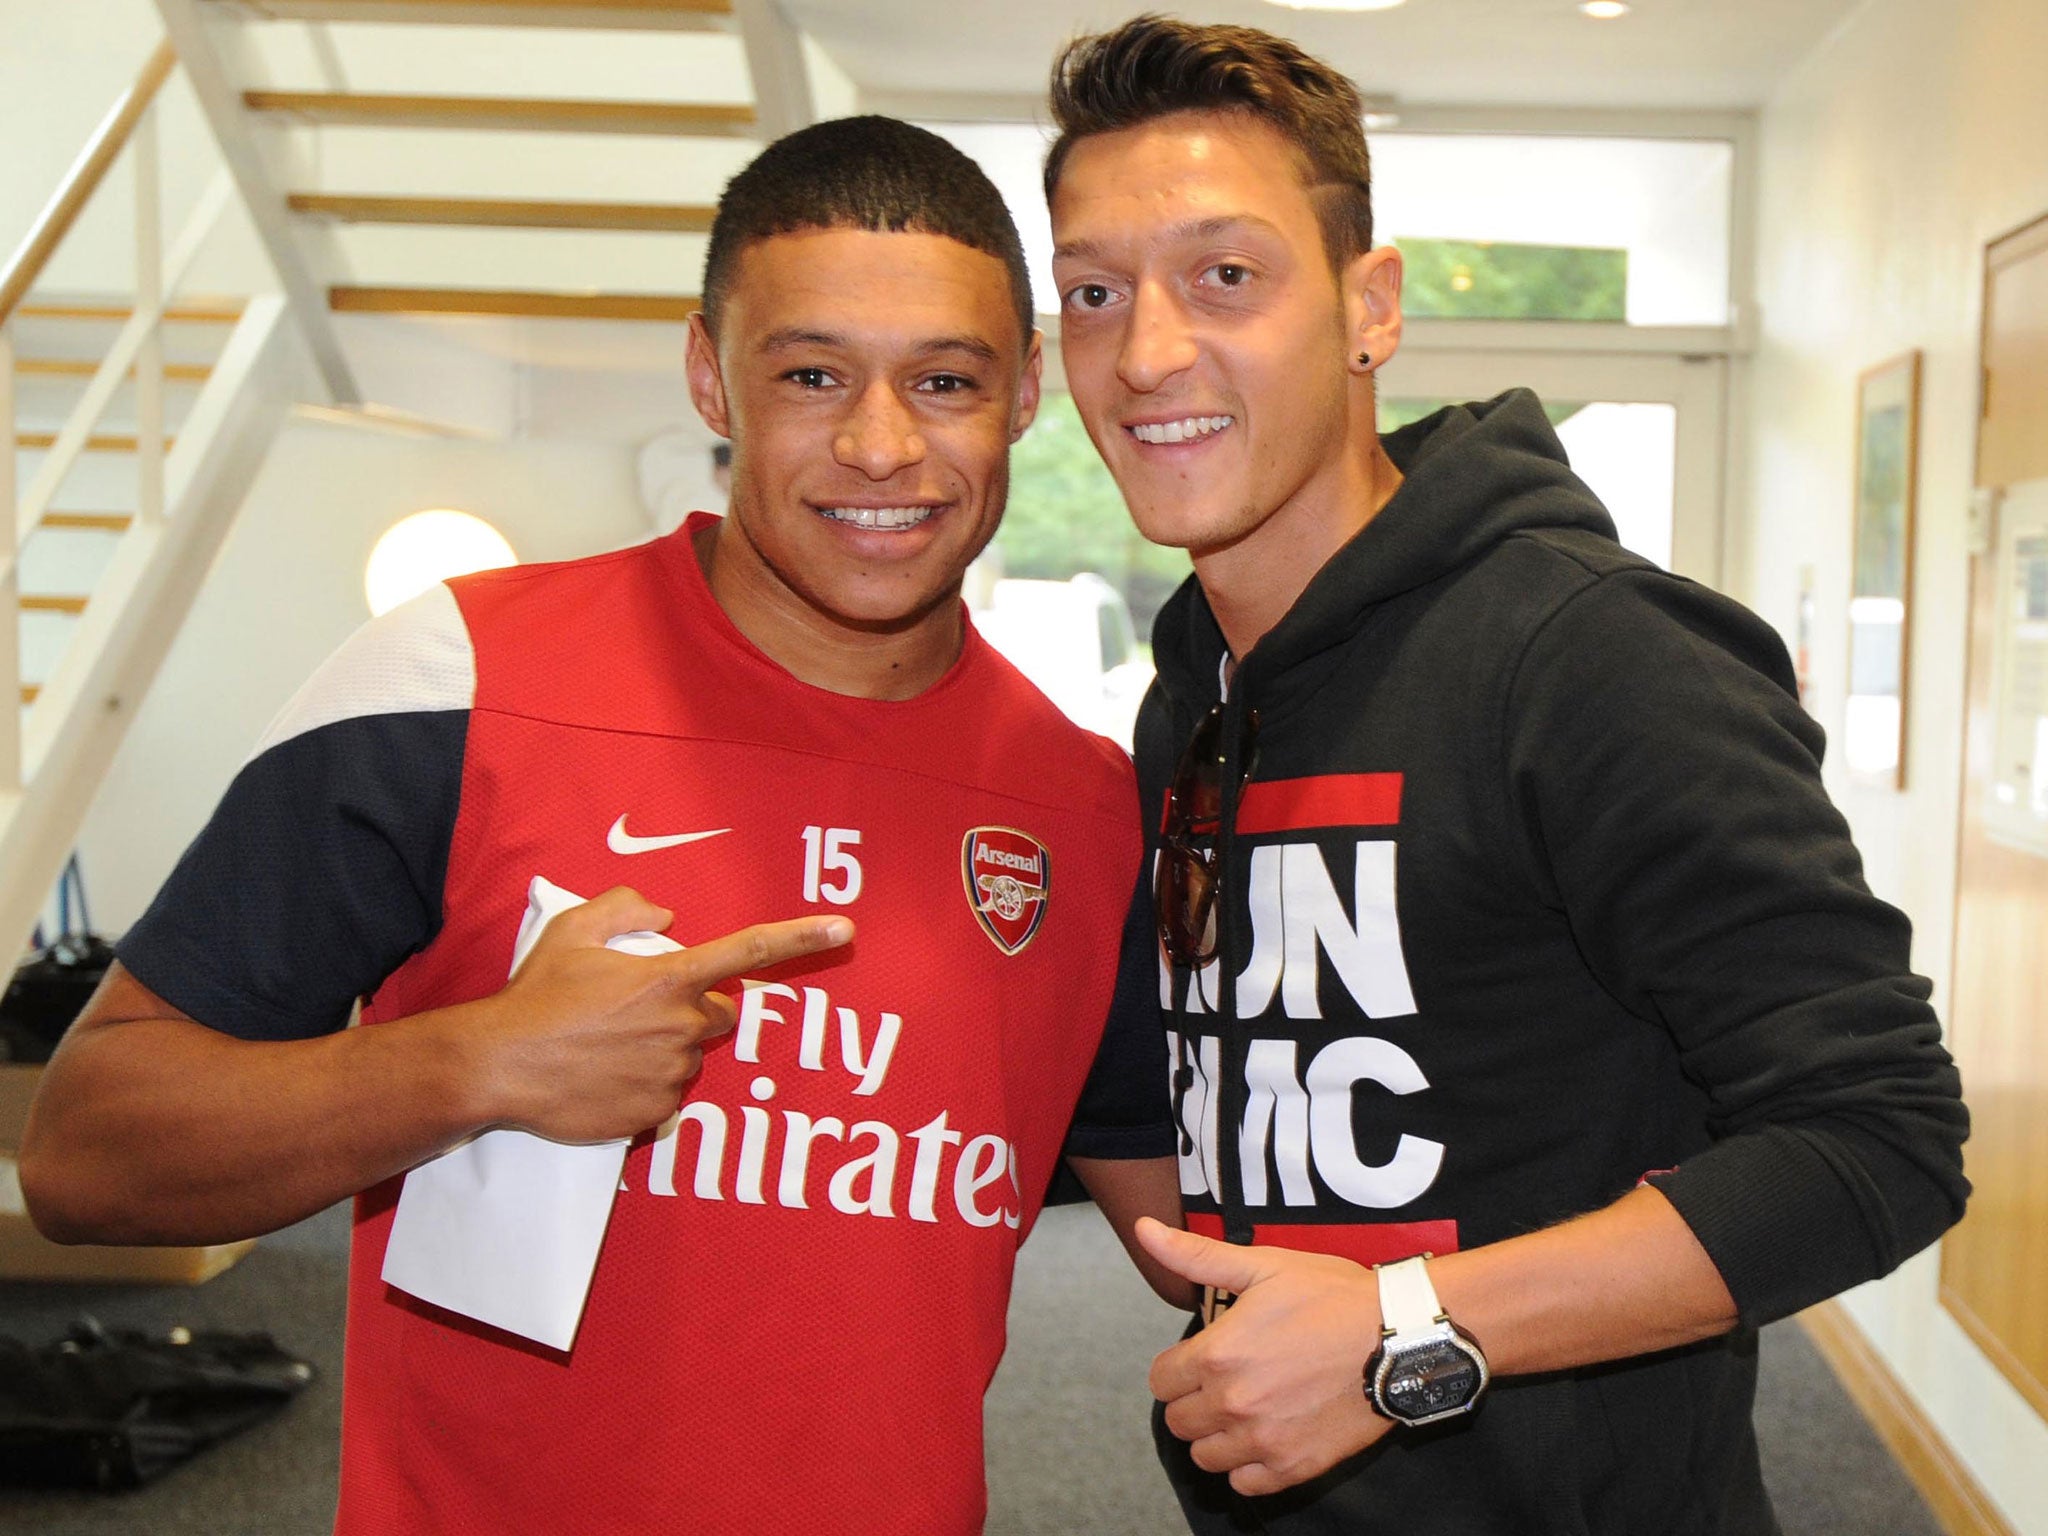 Oxlade-Chamberlain alongside new Arsenal signing Ozil after he linked up with the squad for the first time